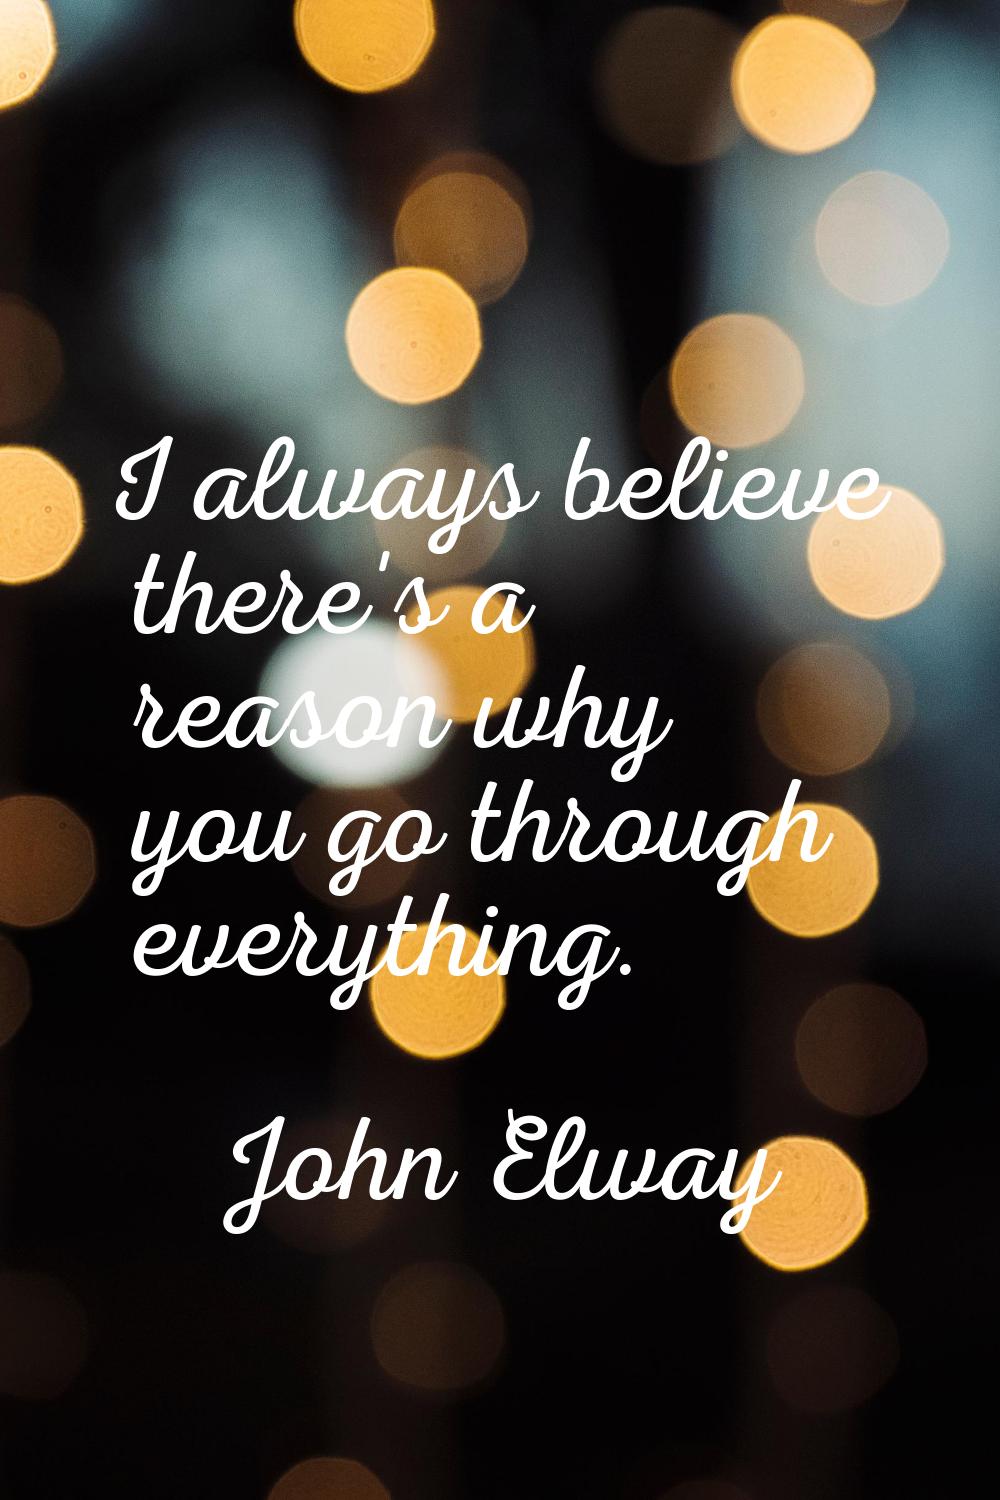 I always believe there's a reason why you go through everything.